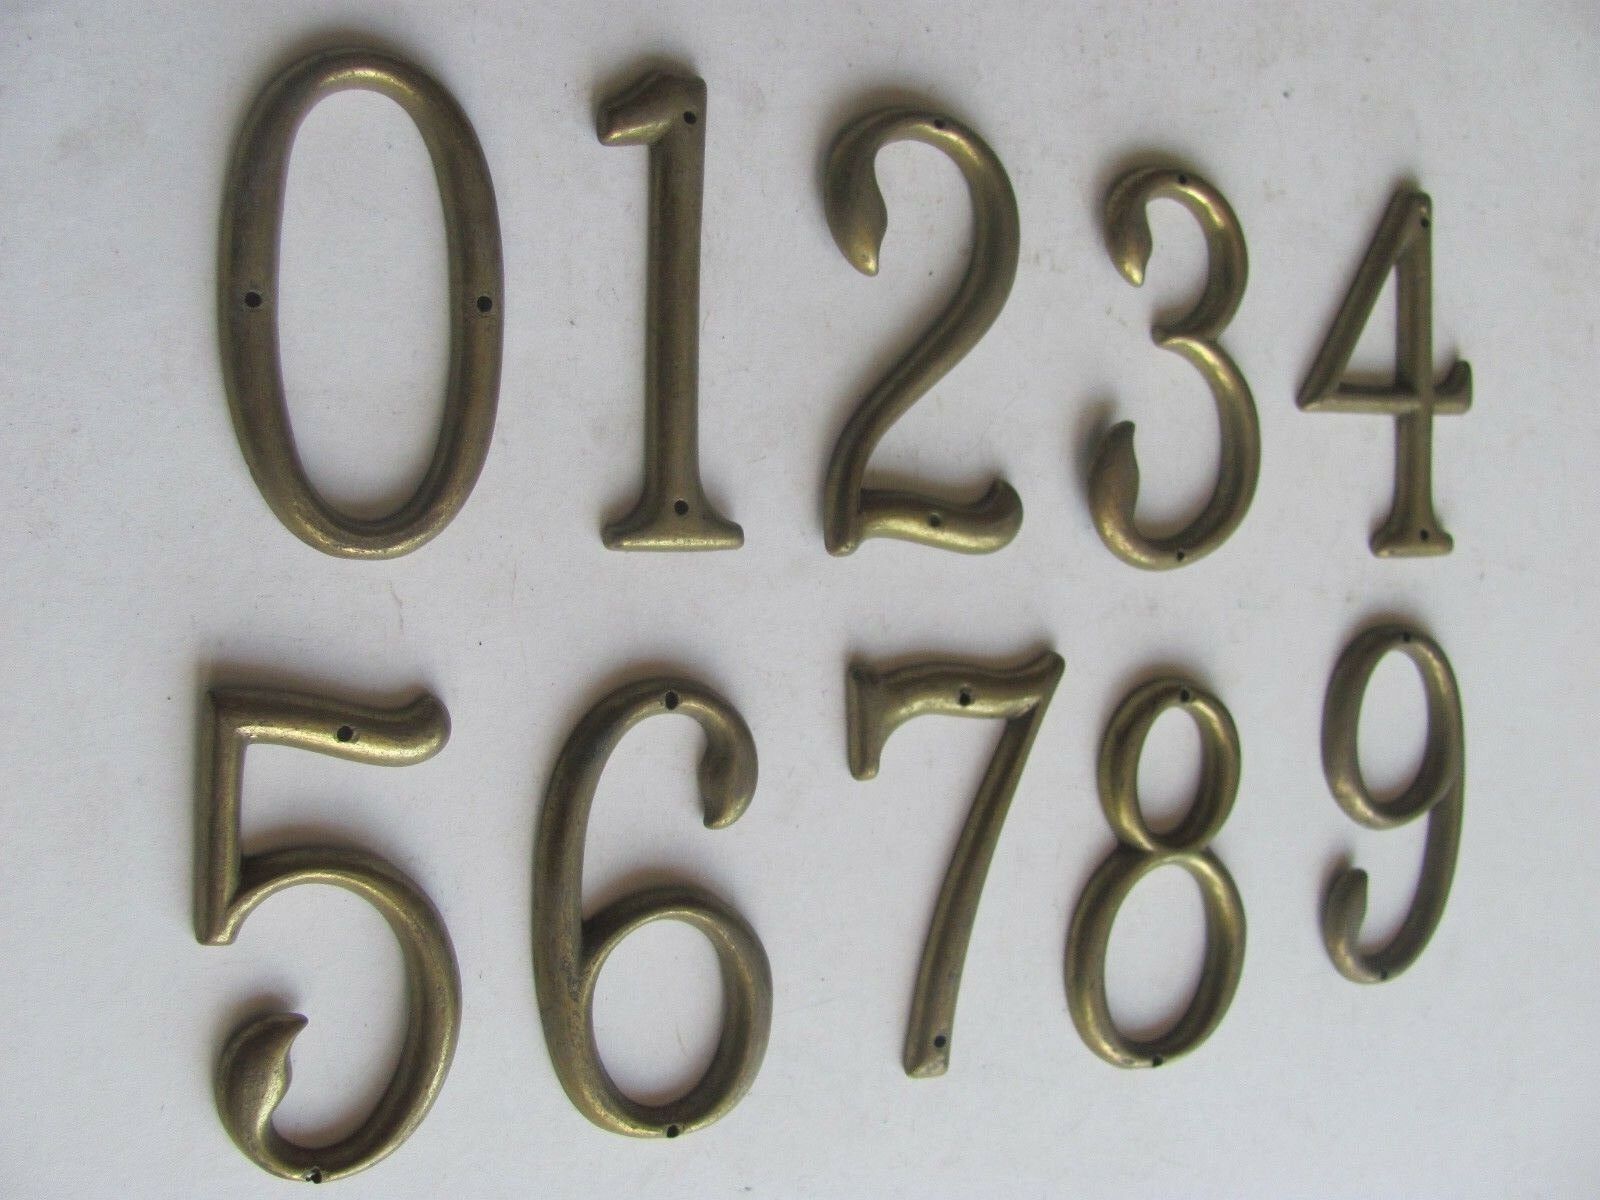 One Antique Vintage Solid Brass House Number Make Your Own Set - Many Available!